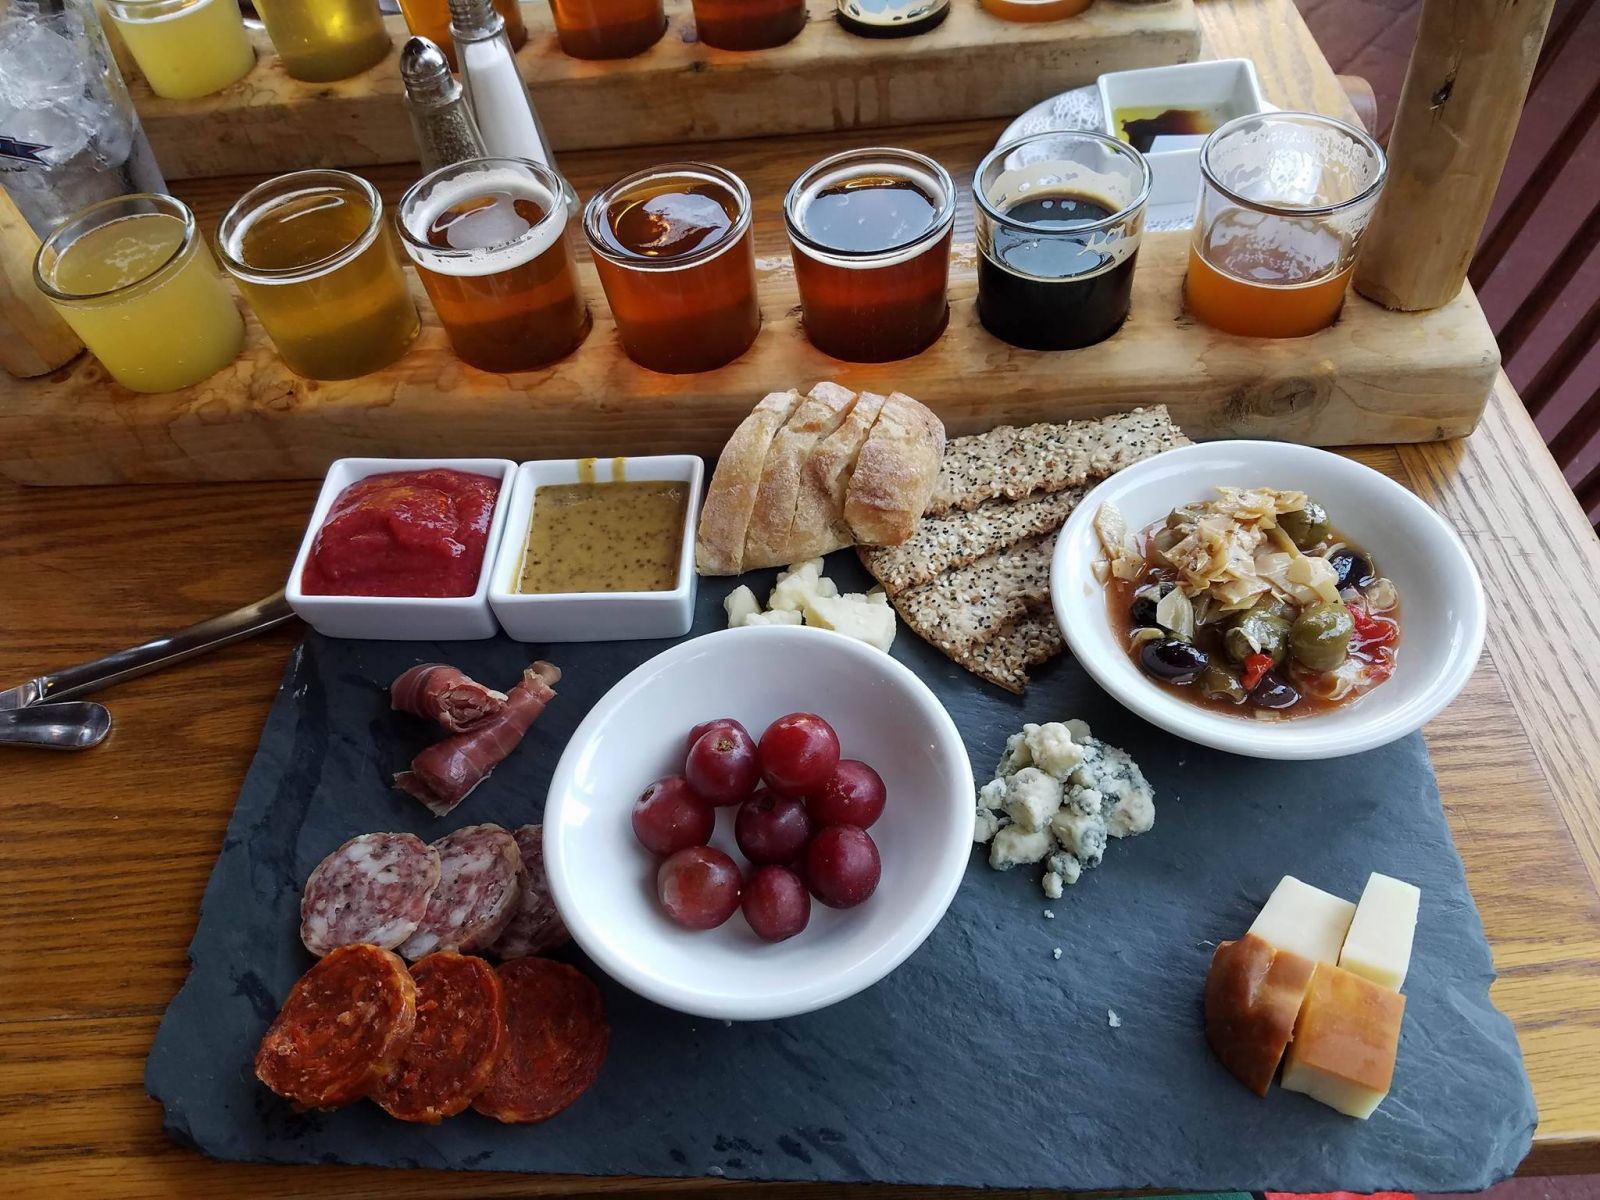 My beer flight accompanied by a delightful cheese and meat platter.